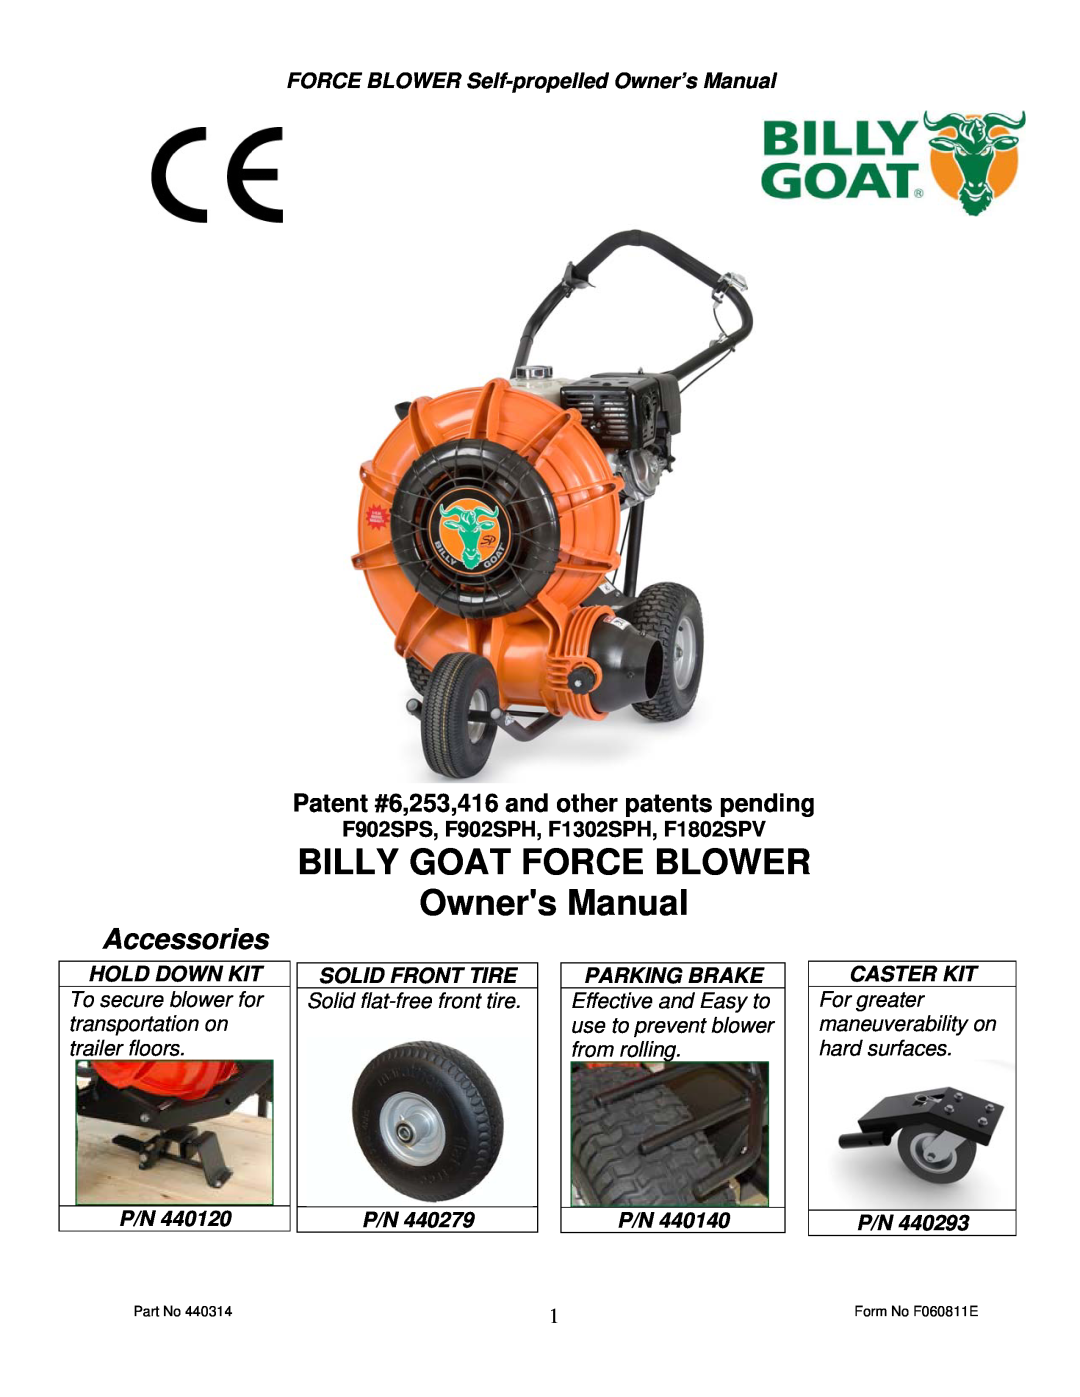 Billy Goat F902SPH owner manual Patent #6,253,416 and other patents pending, Hold Down Kit, Solid Front Tire, Caster Kit 